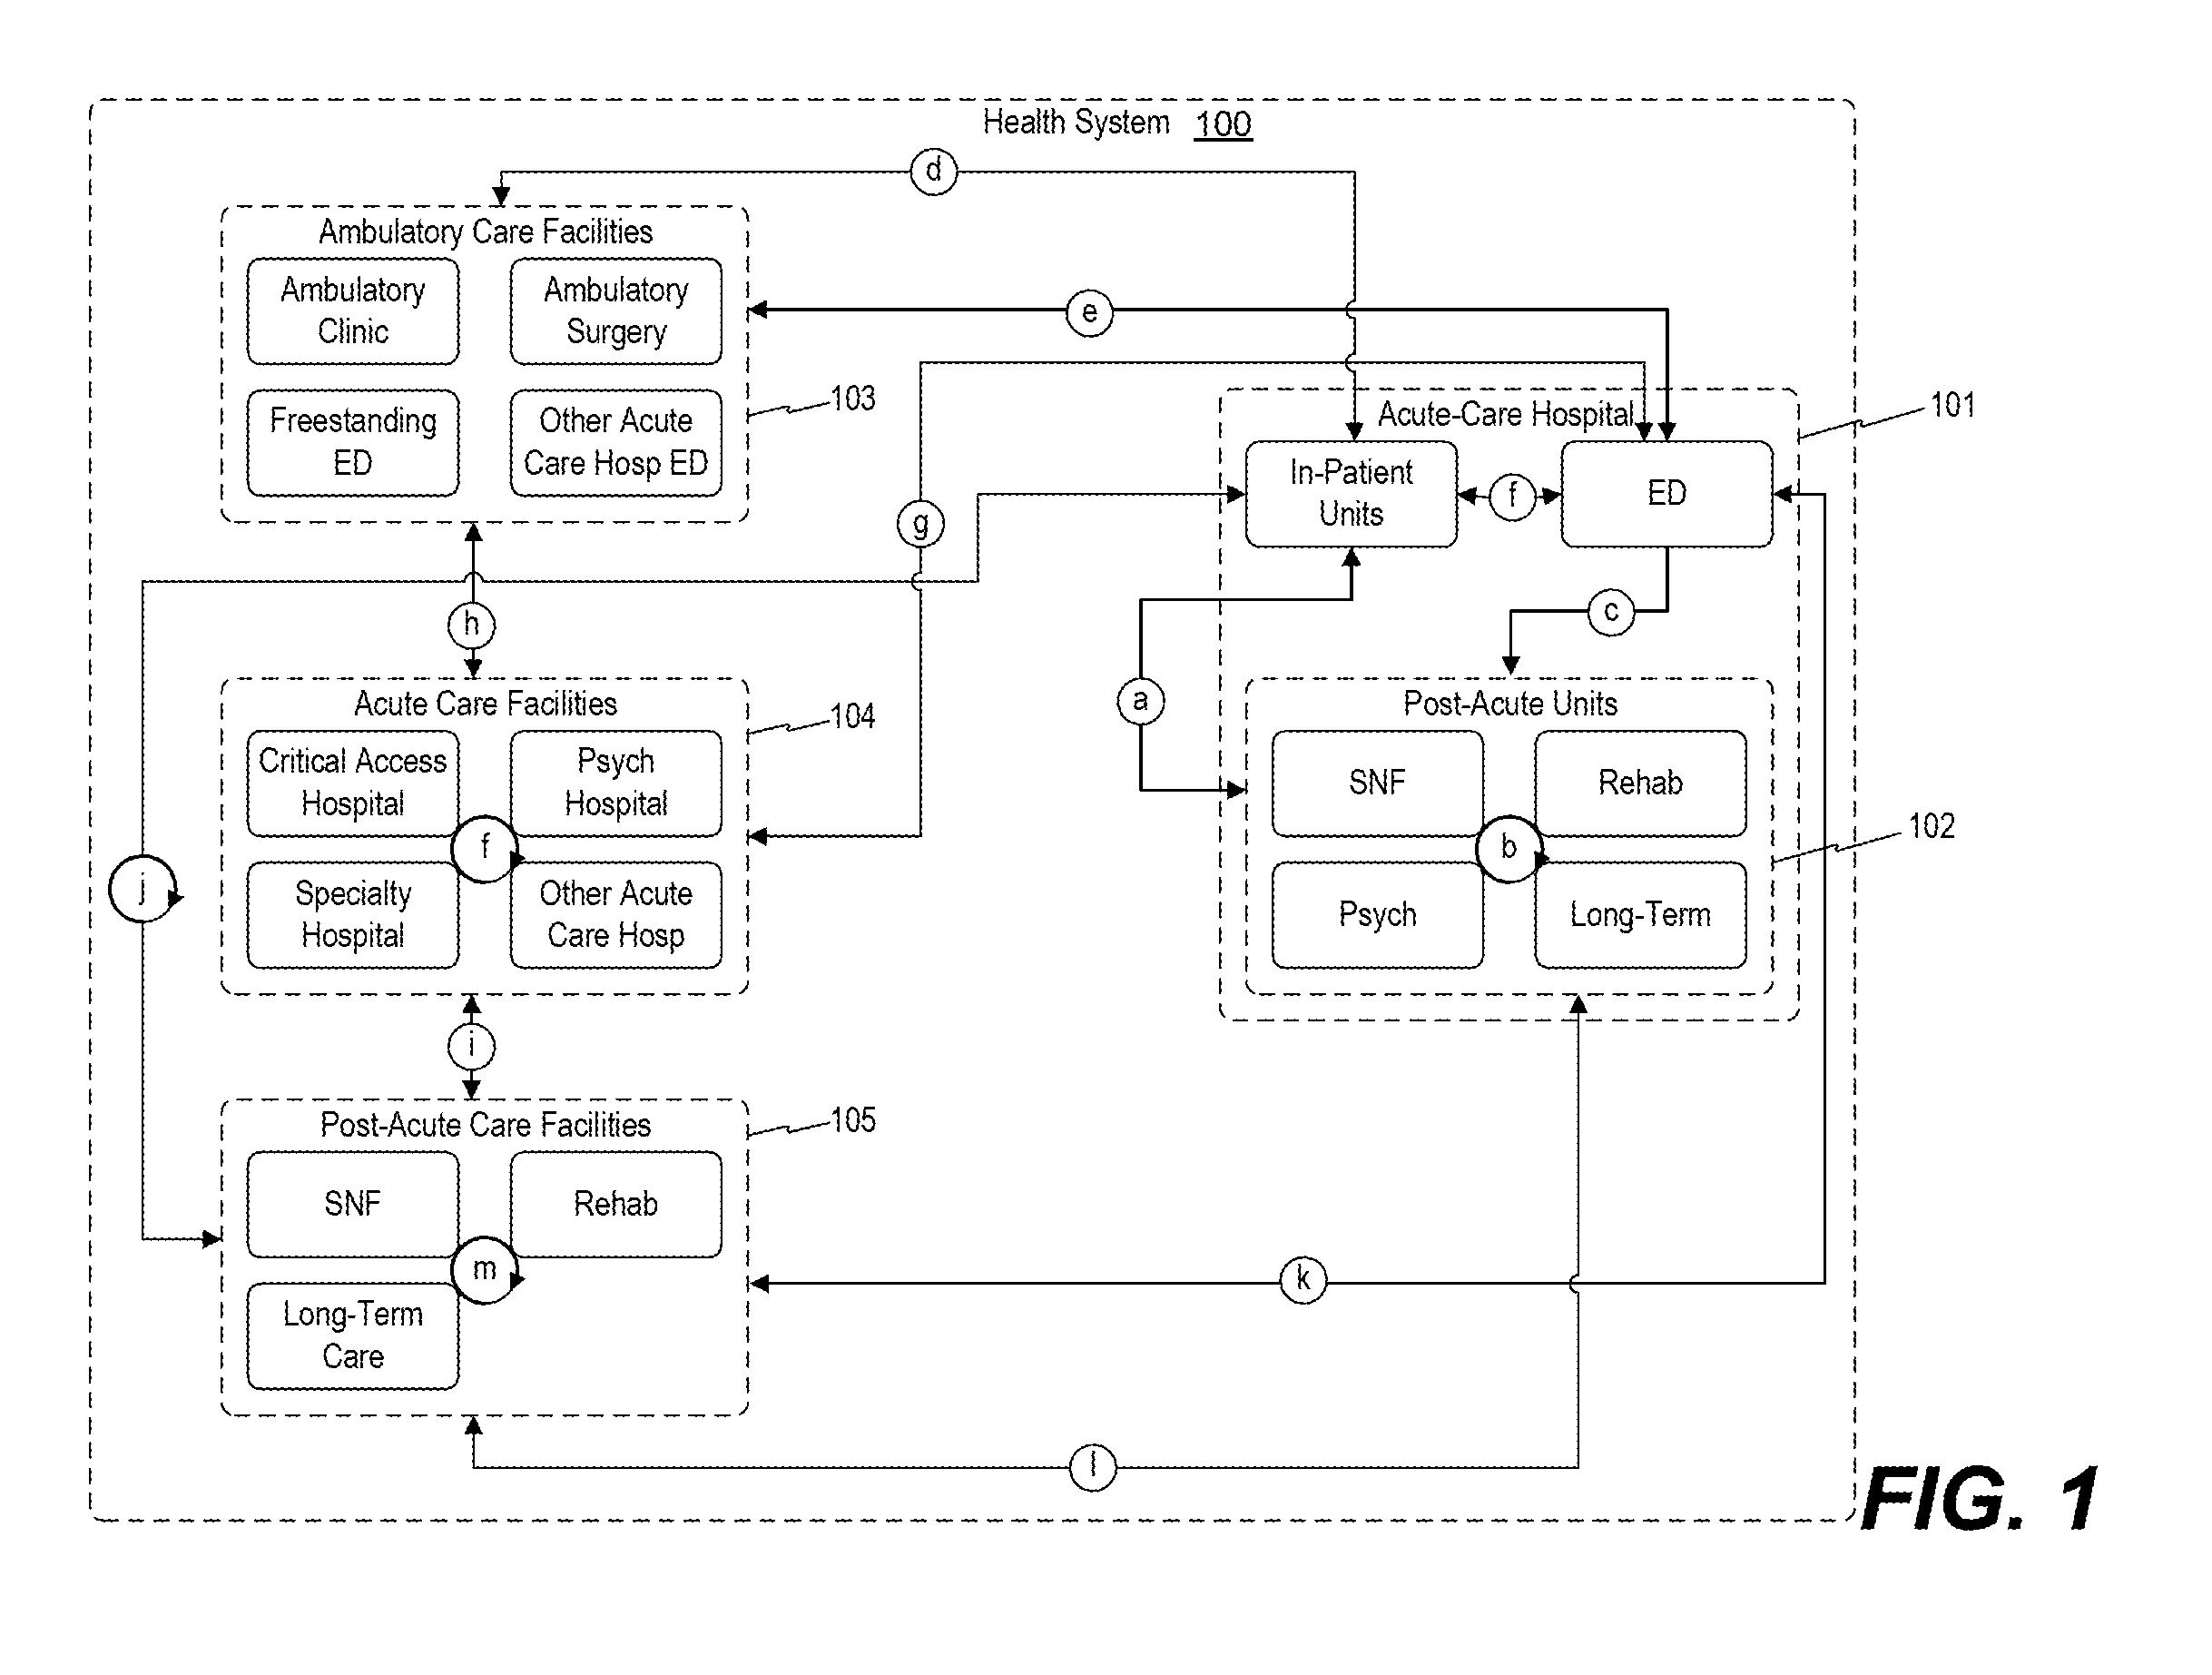 Computerized data processing systems and methods for generating graphical user interfaces